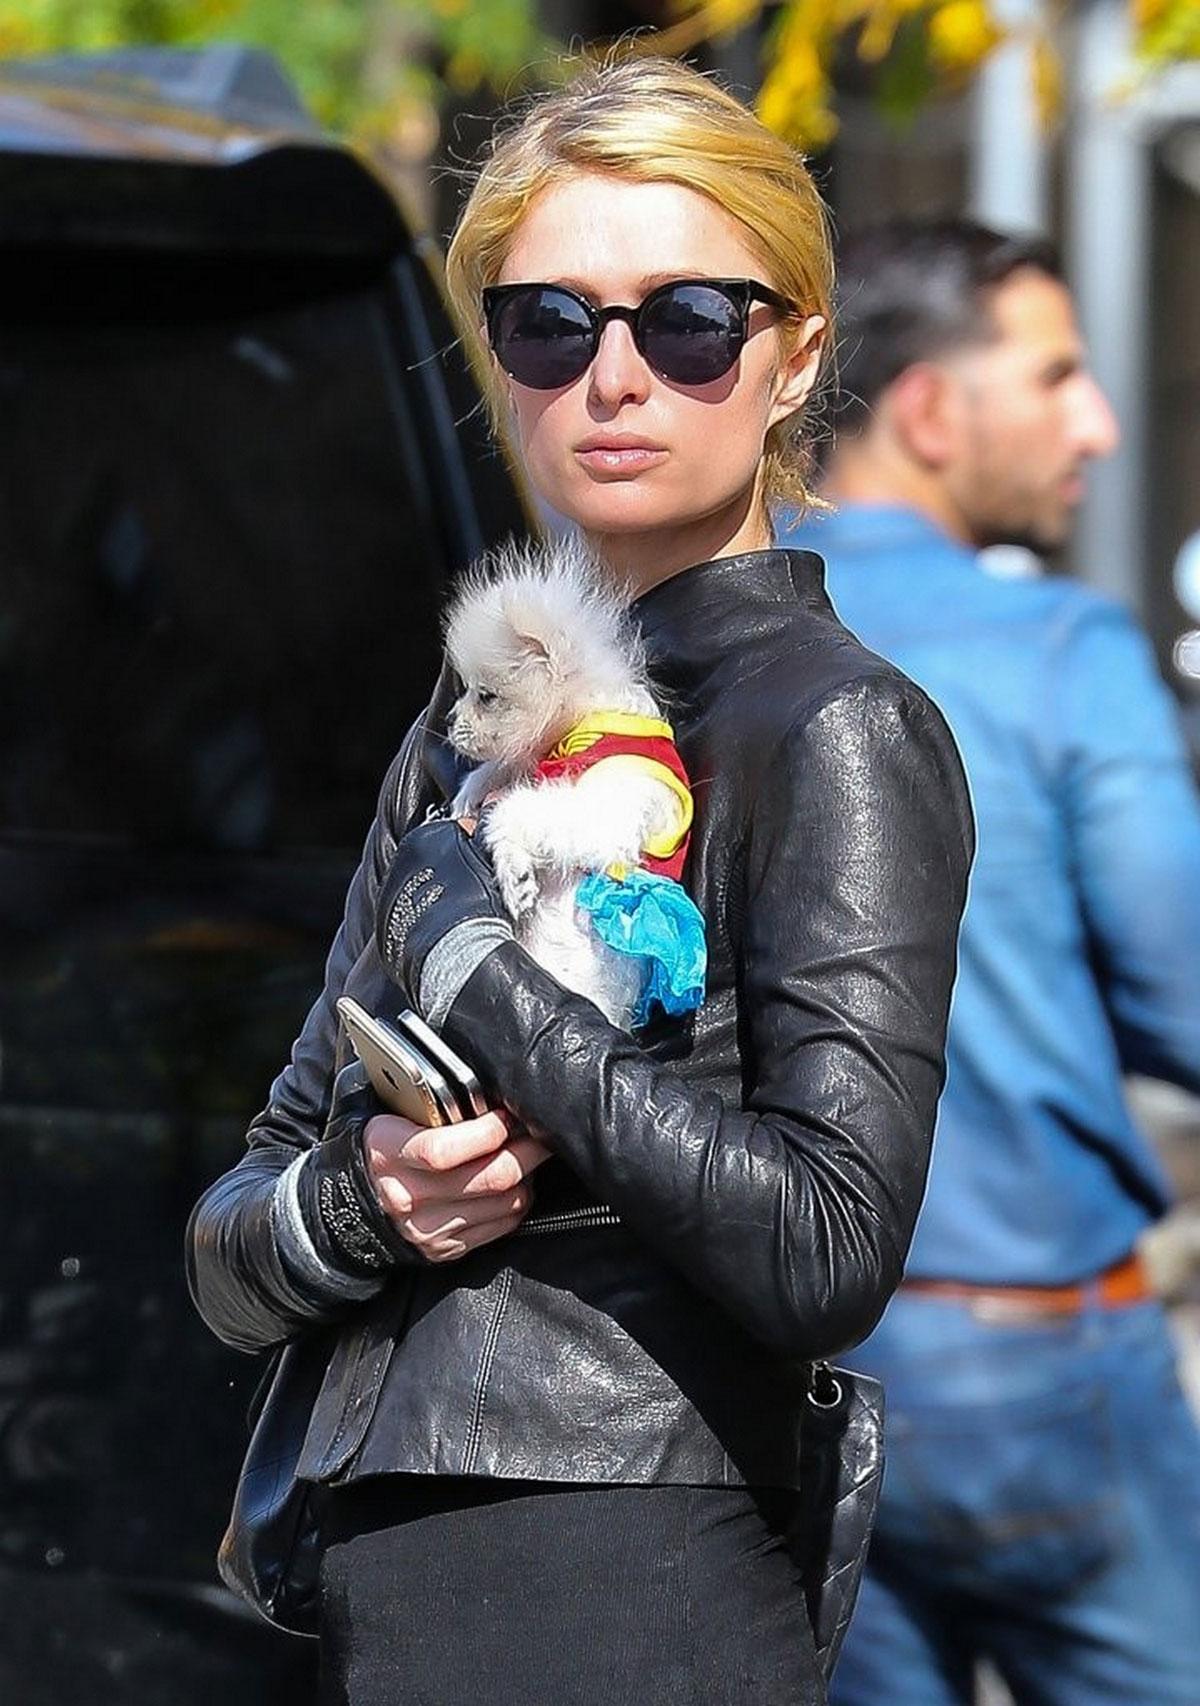 Paris Hilton seen with her dog waiting for a cab